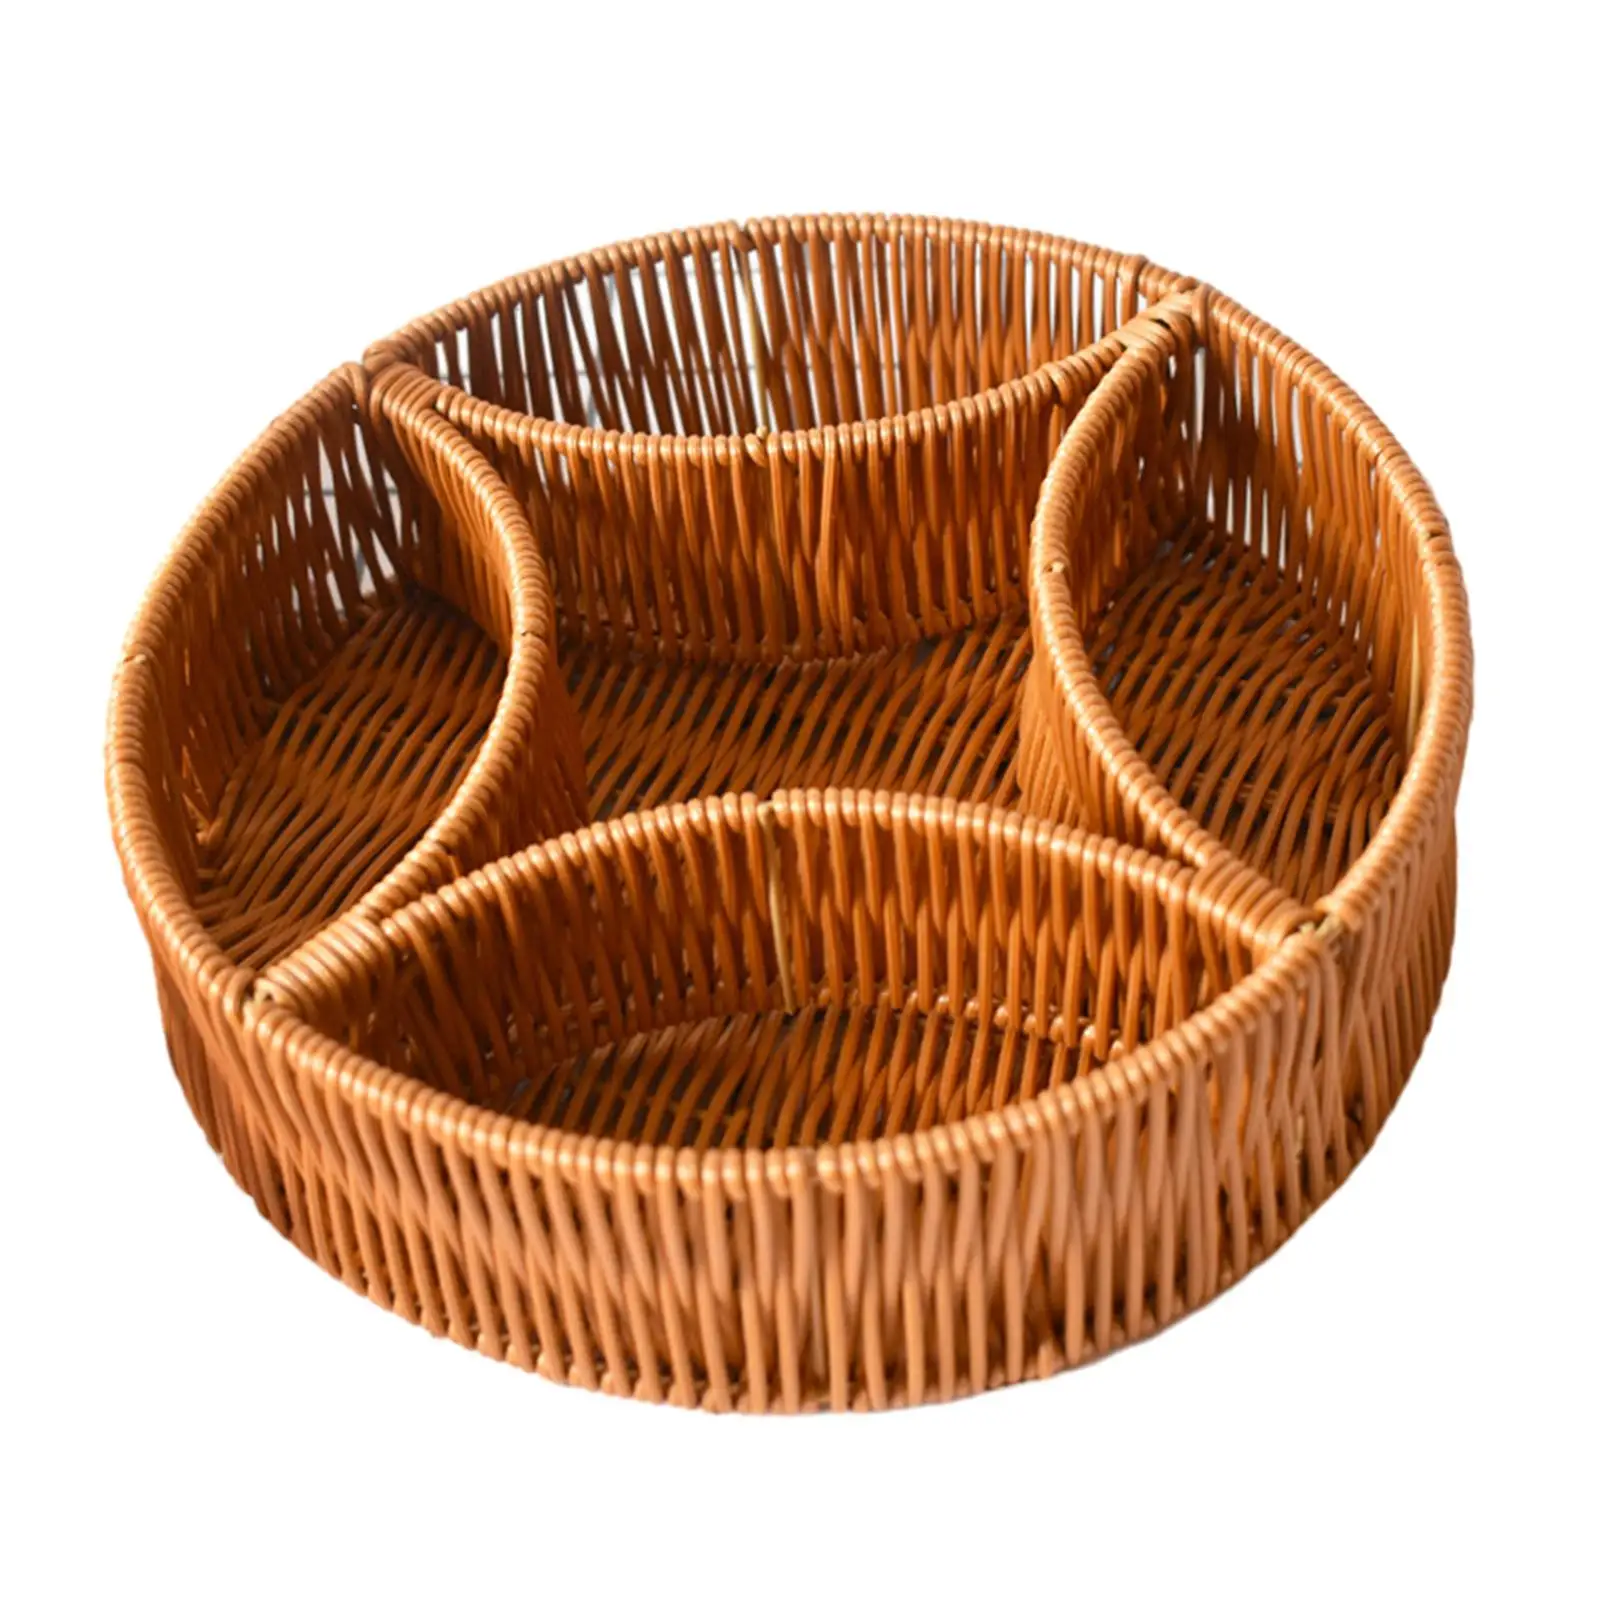 Hand Woven Serving Basket Candy Serving Tray Rustic Decorative Food Serving Holder for Pantry Restaurant Hotel Coffee Table Home